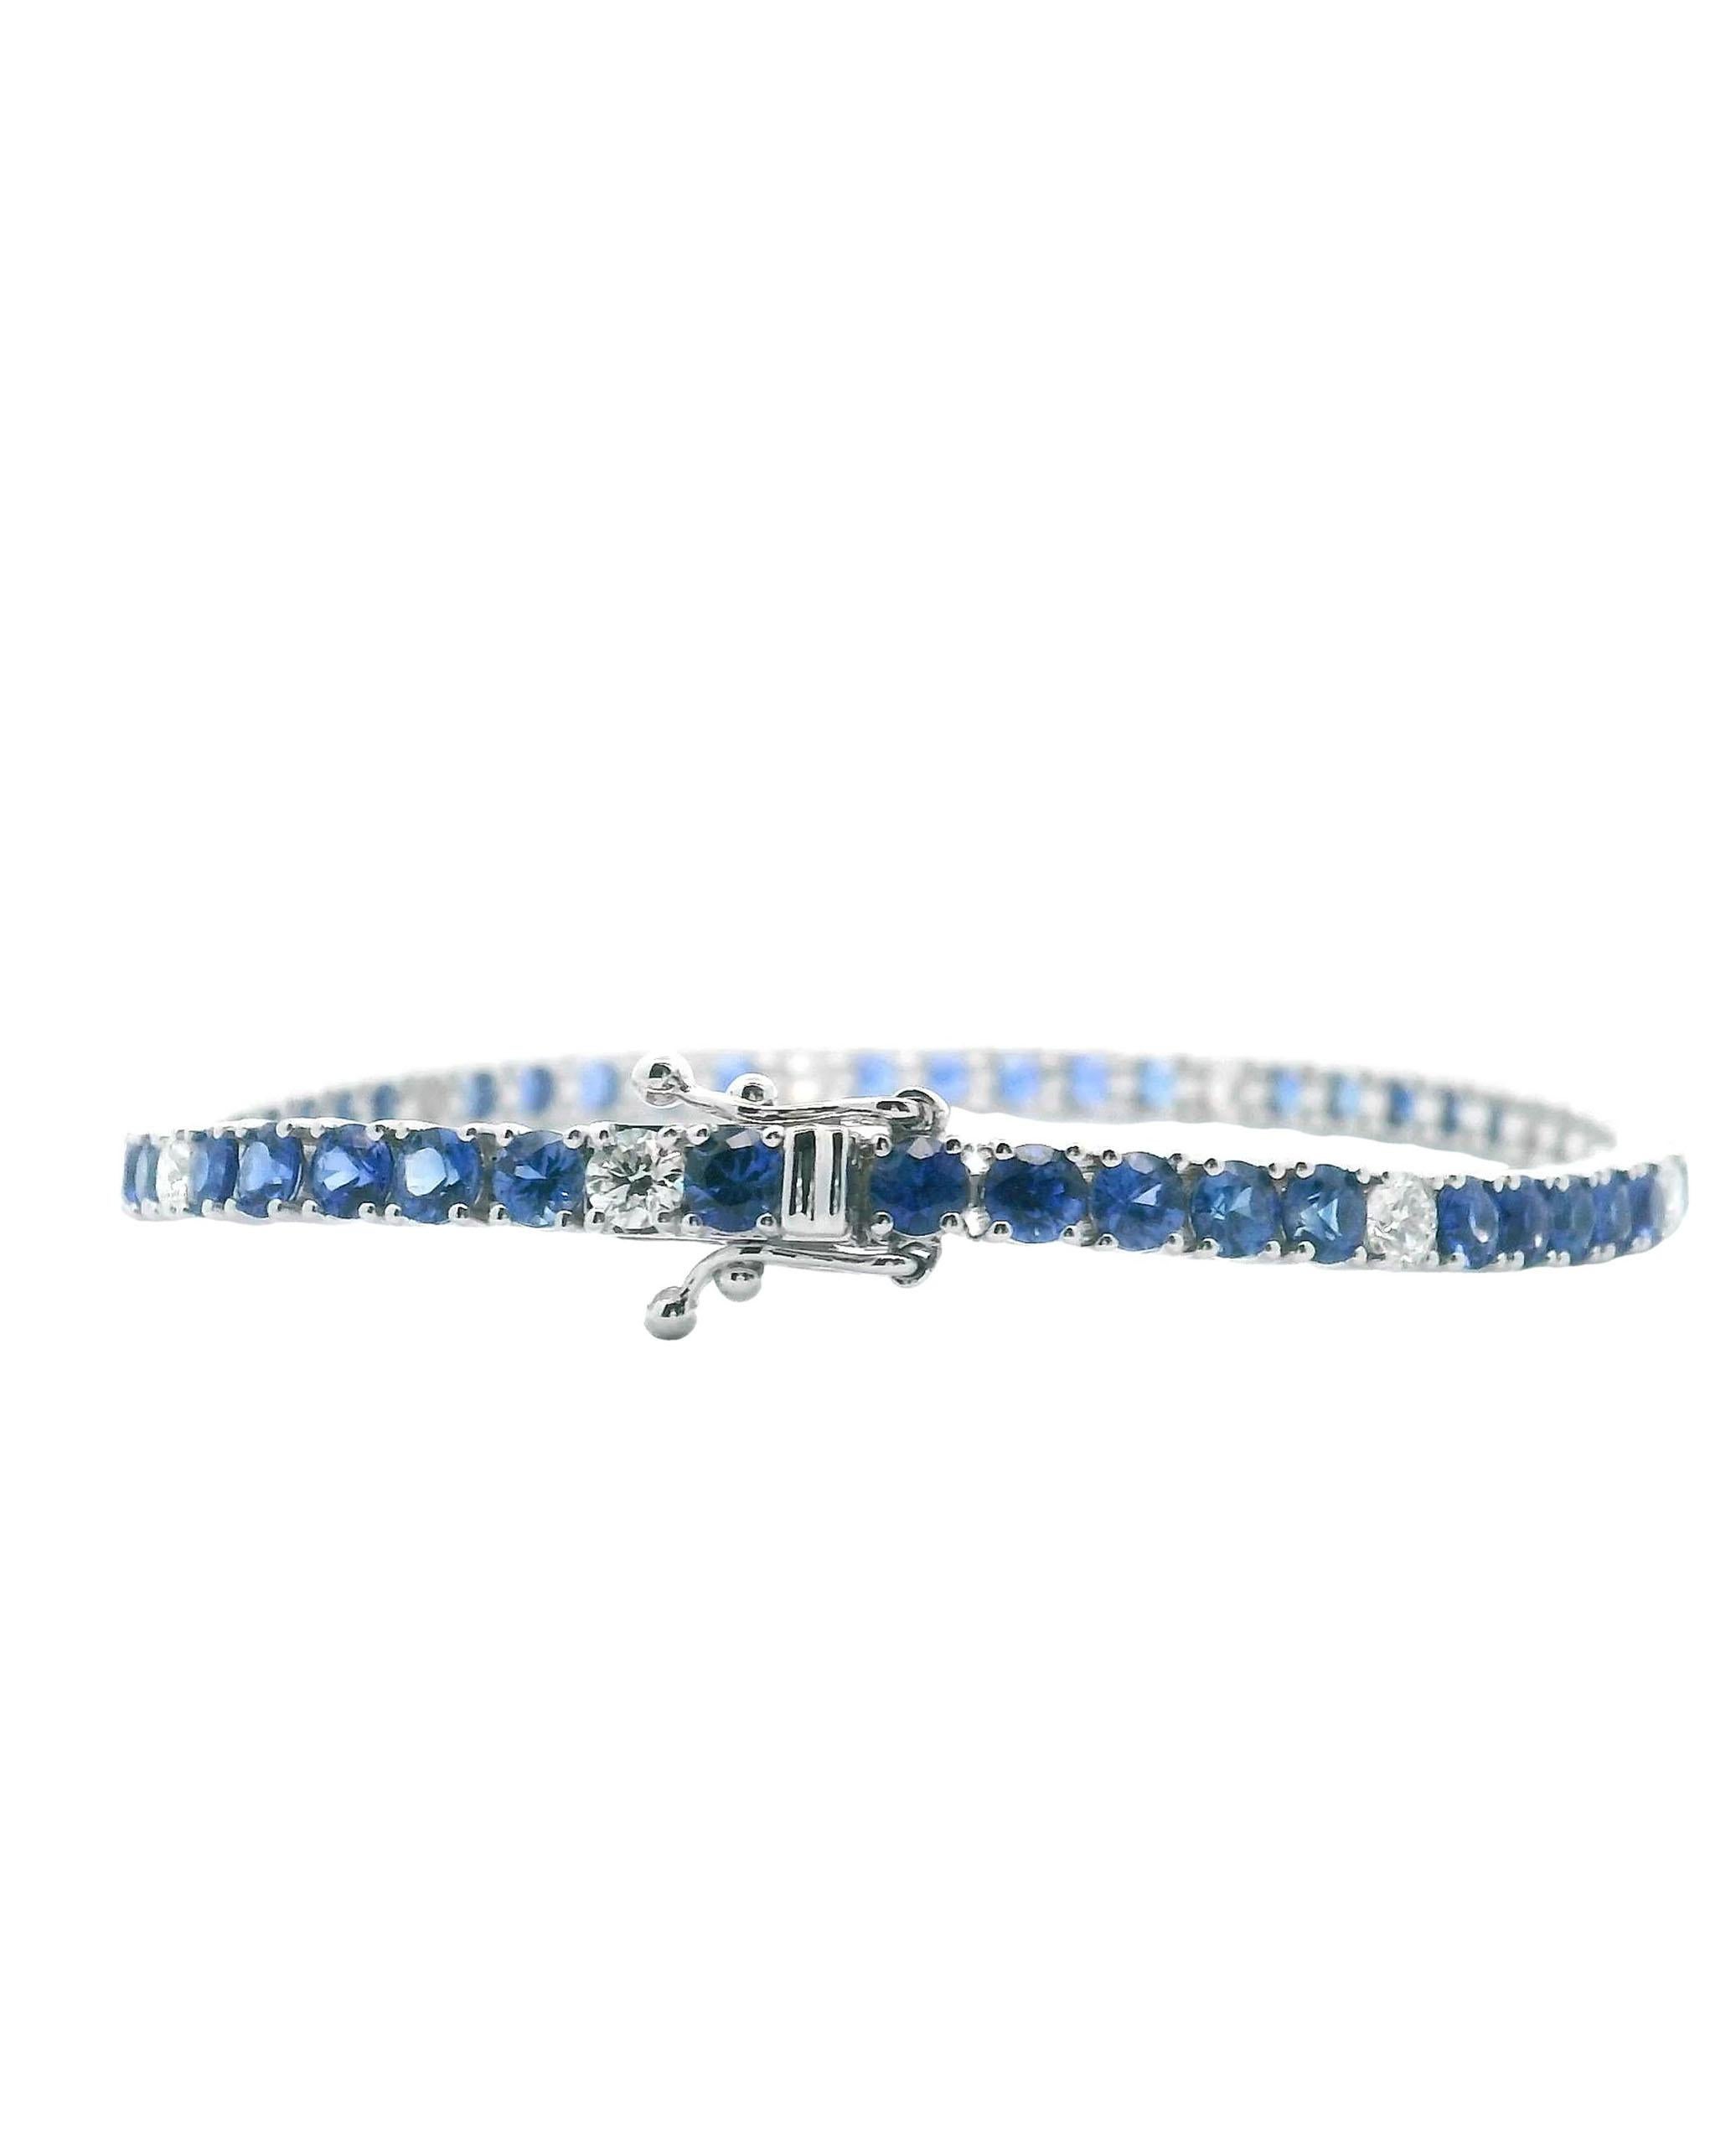 Contemporary 14K White Gold Tennis Bracelet with Sapphires and Diamonds For Sale